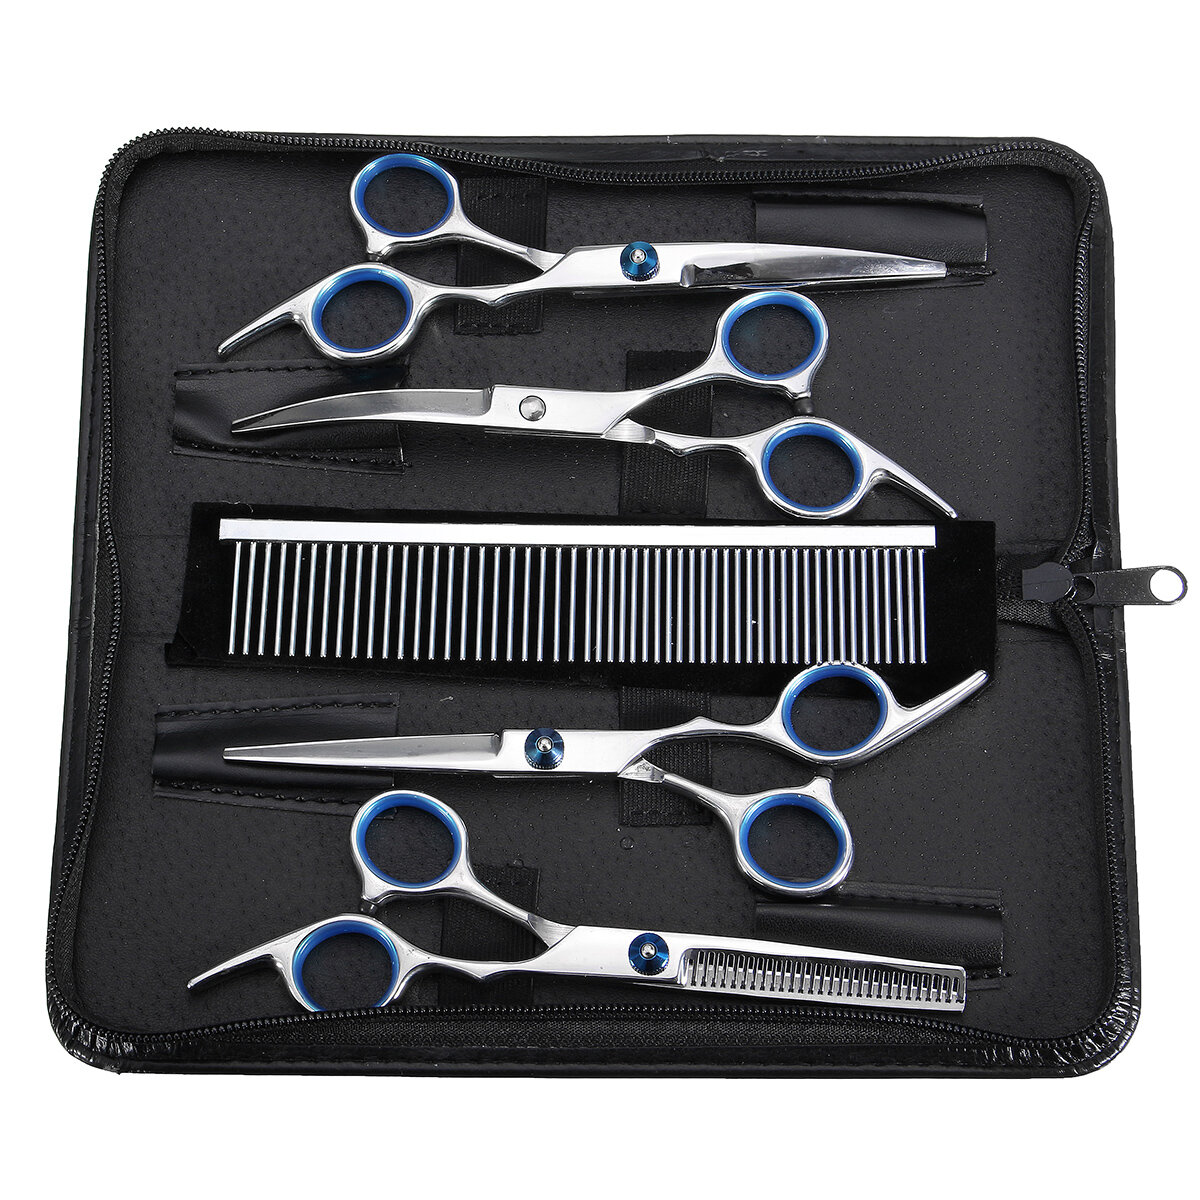 7Pcs/Lot Dog Cat Grooming Scissors Set Straight Curved Cutting Thinning Shears Kit Puppy Hair Trimmer Pet Beauty-heyidear